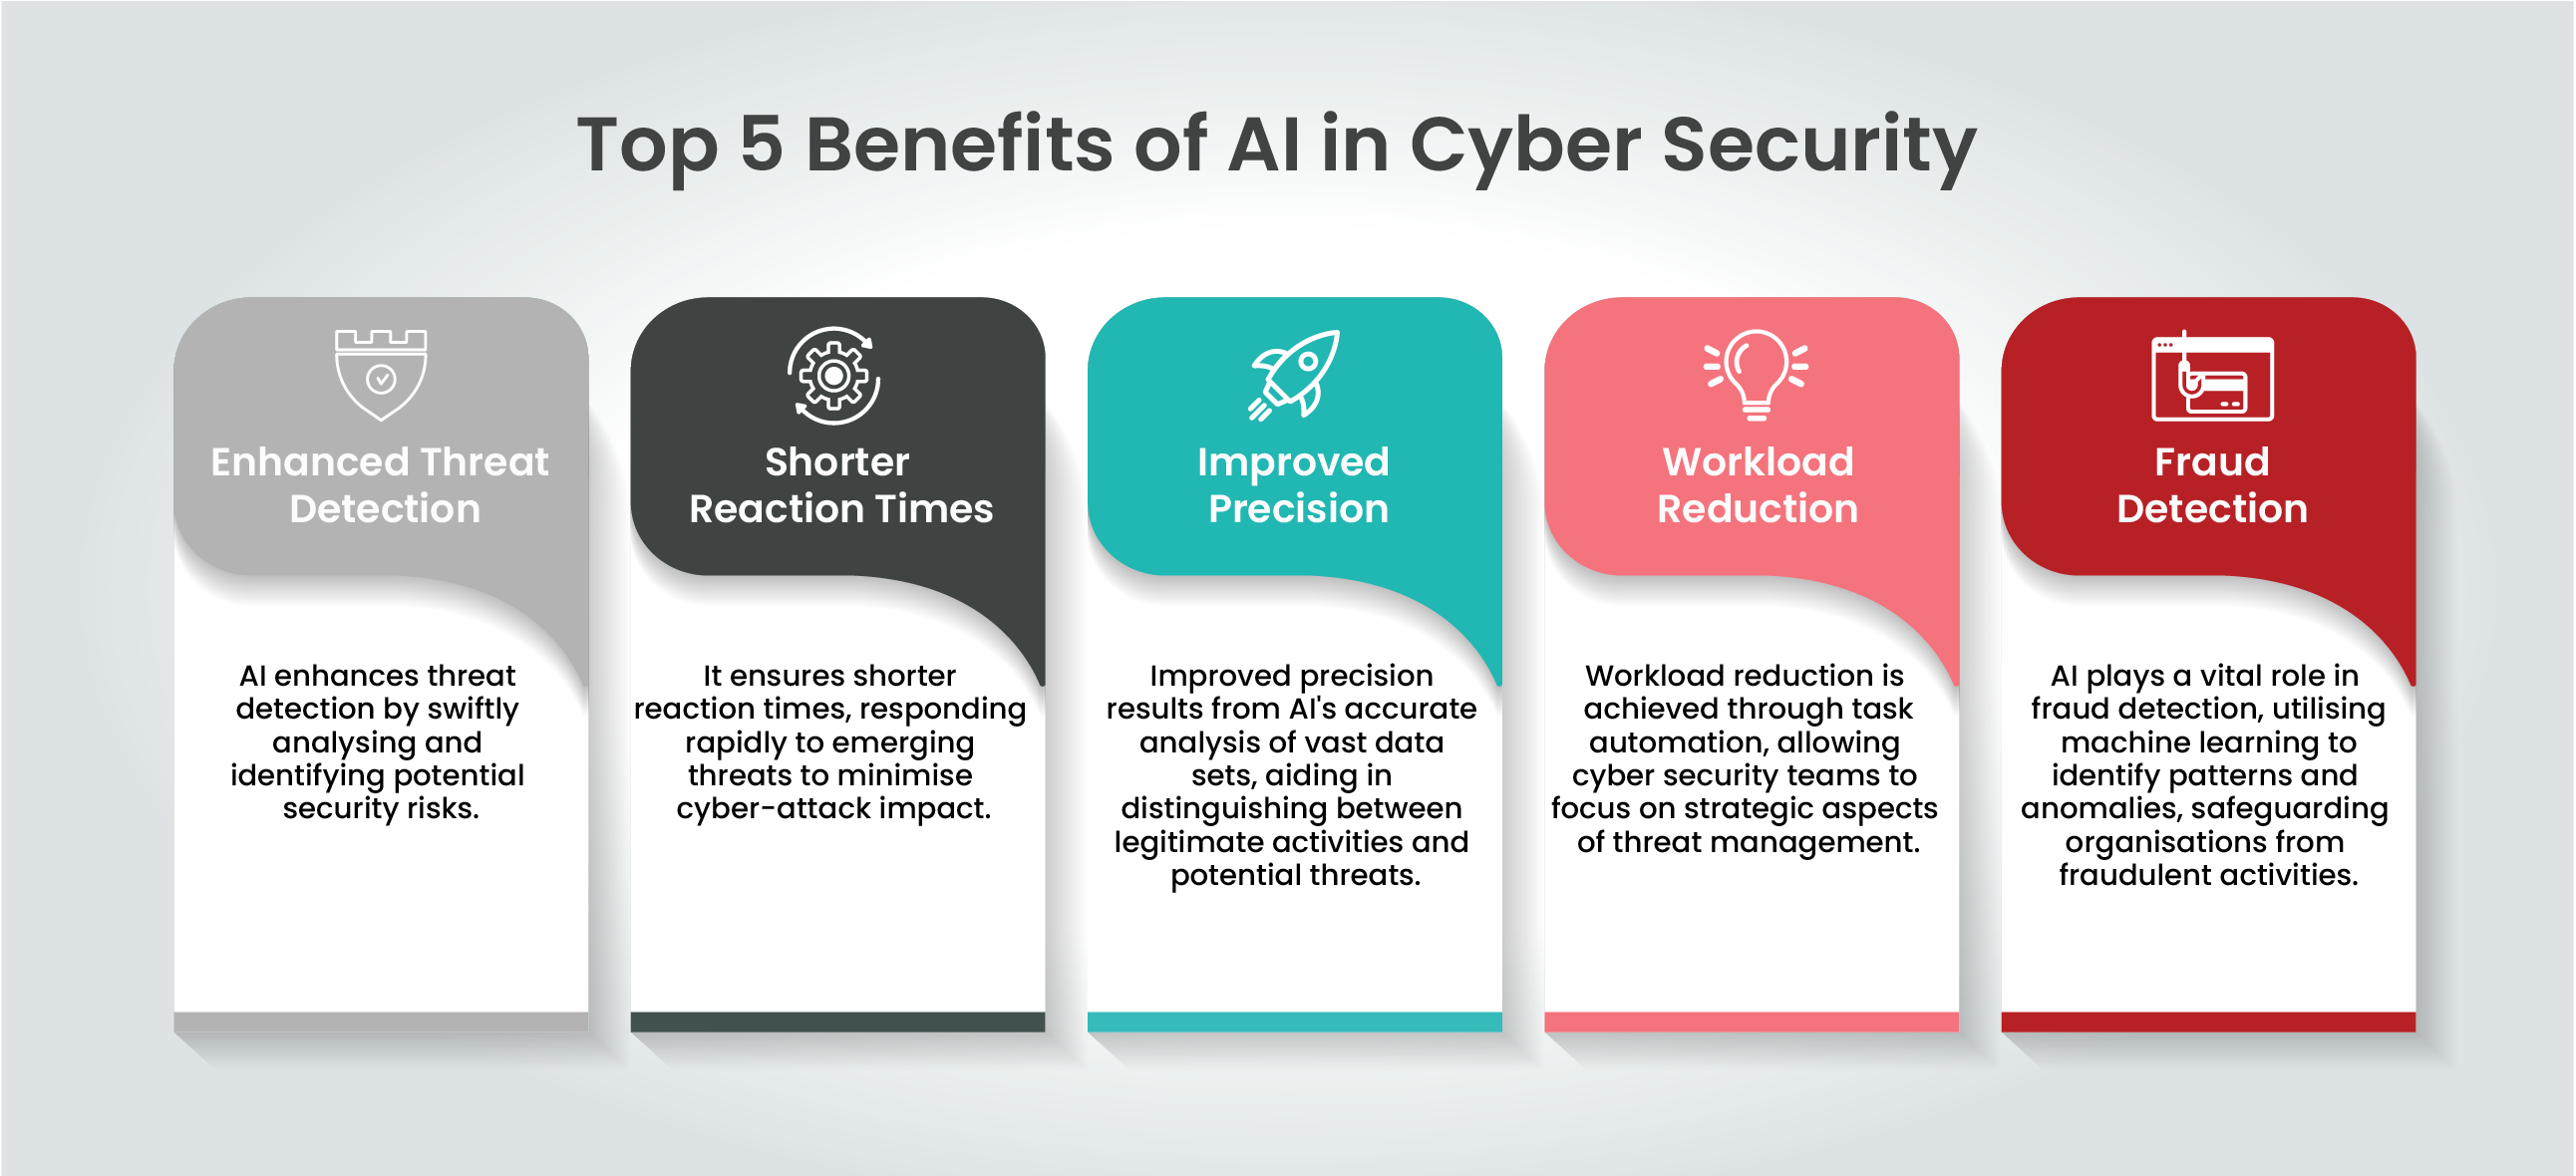 Benefits of AI in Cyber Security